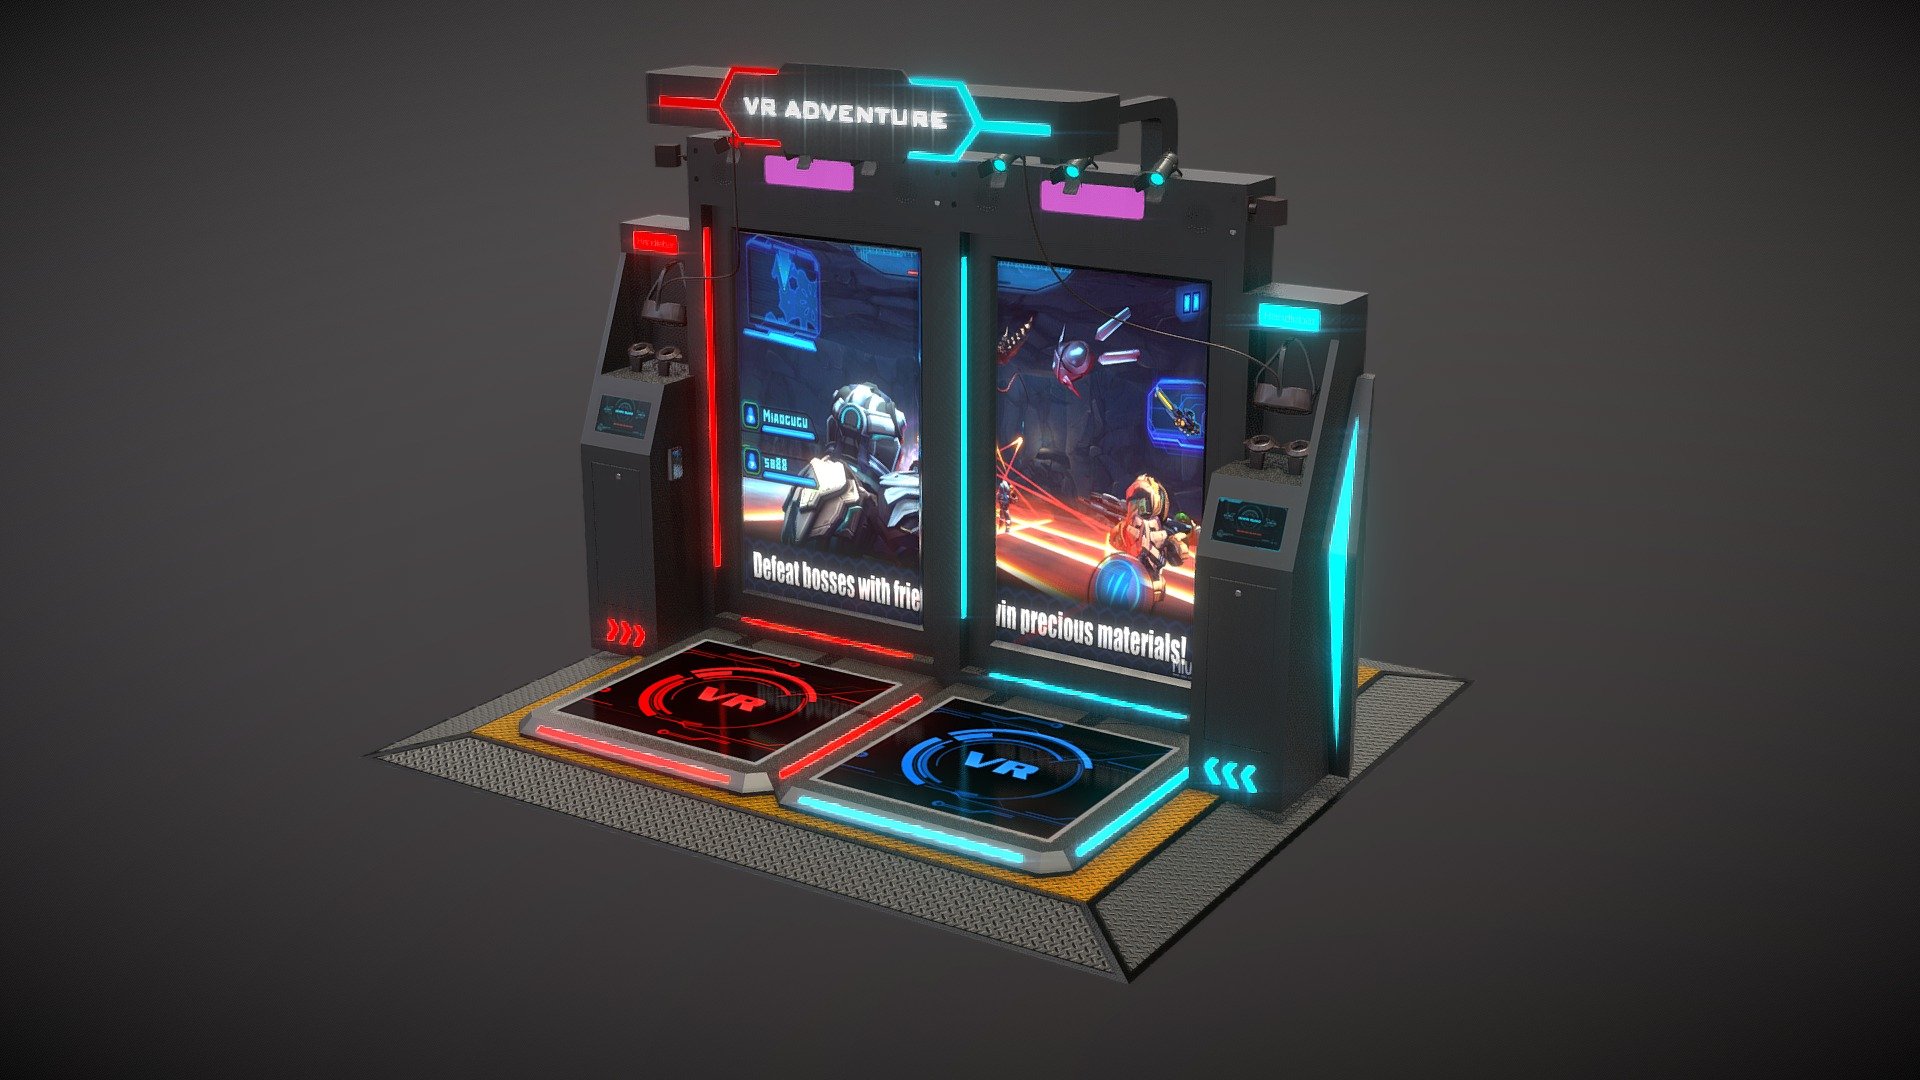 VR ADVENTURE Game Station

3D Prototype model of Virtual Reality Gaming Equipment and Augmented Virtual Reality VR ADVENTURES - VR ADVENTURE Game Station - 3D model by Sergo_CRAFTSMAN 3d model